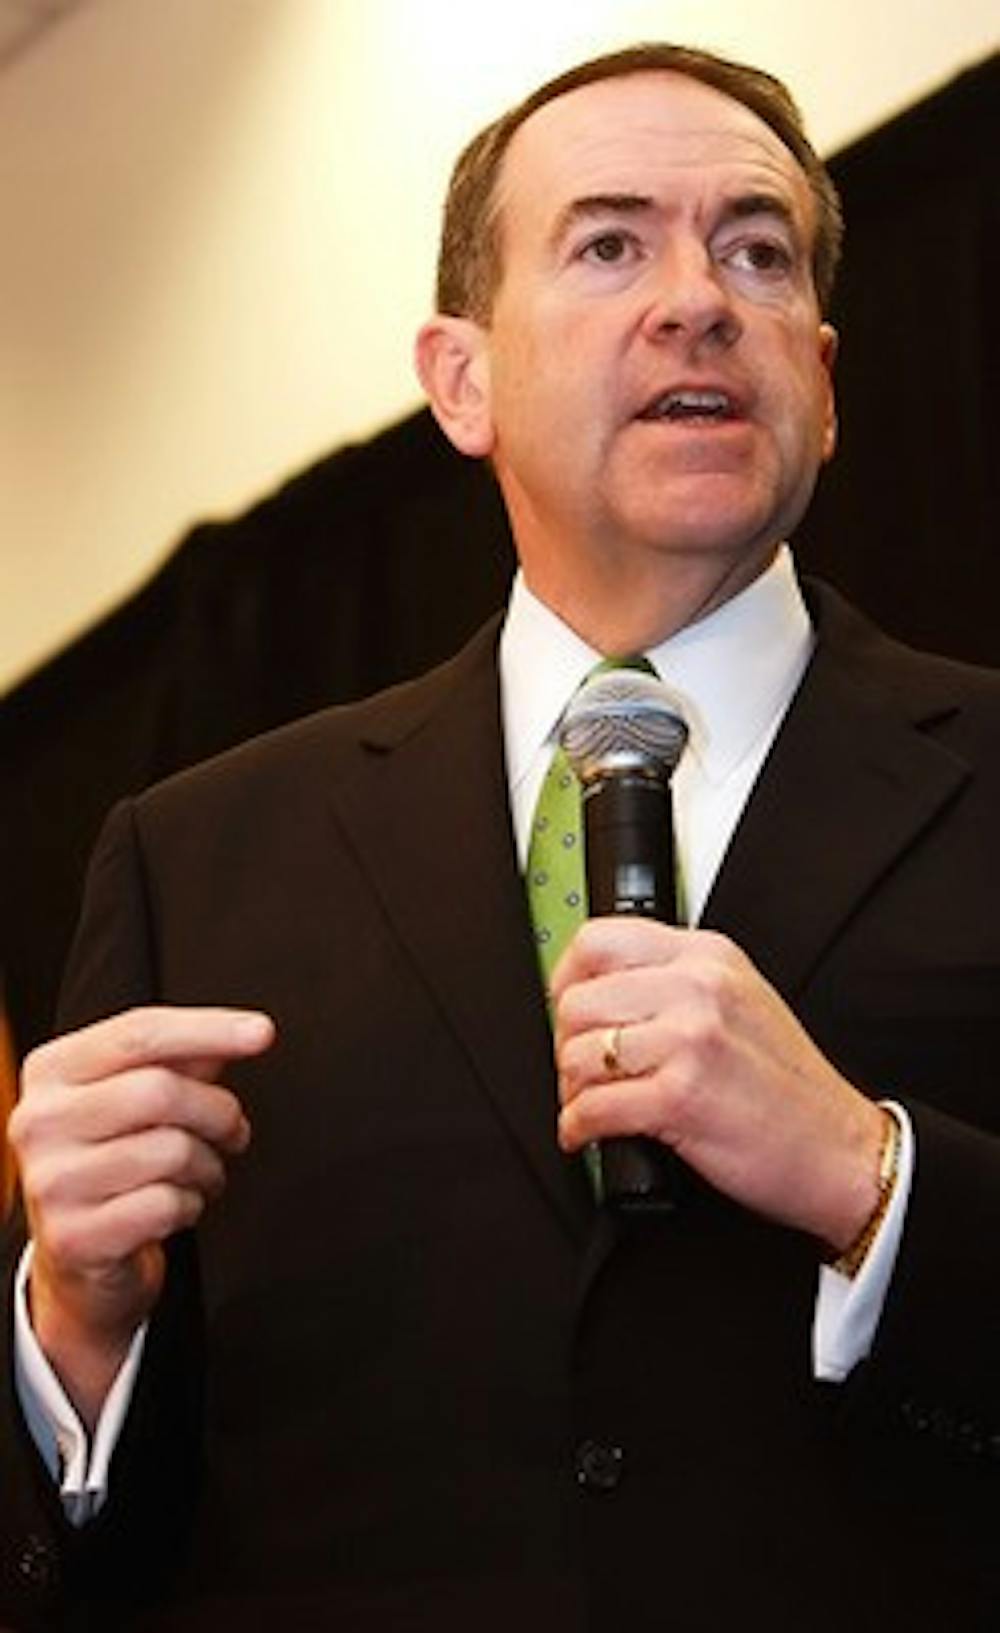 Gov. Huckabee still confident, determined to remain in race